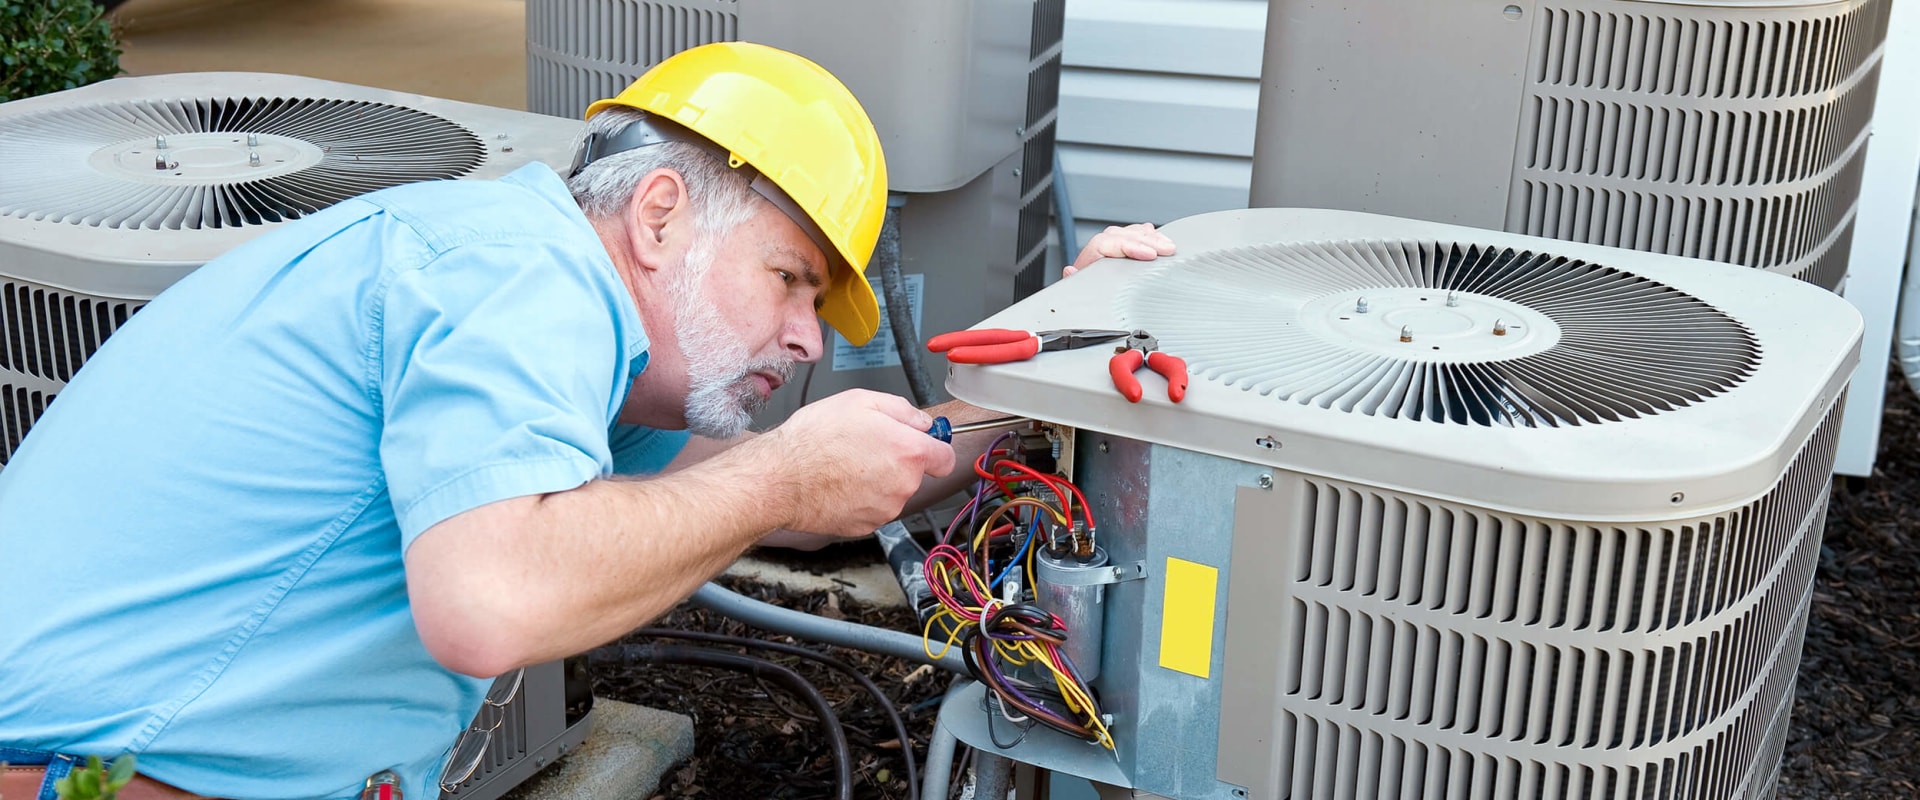 Do You Need HVAC Maintenance in Boca Raton, FL? Here's How to Tell